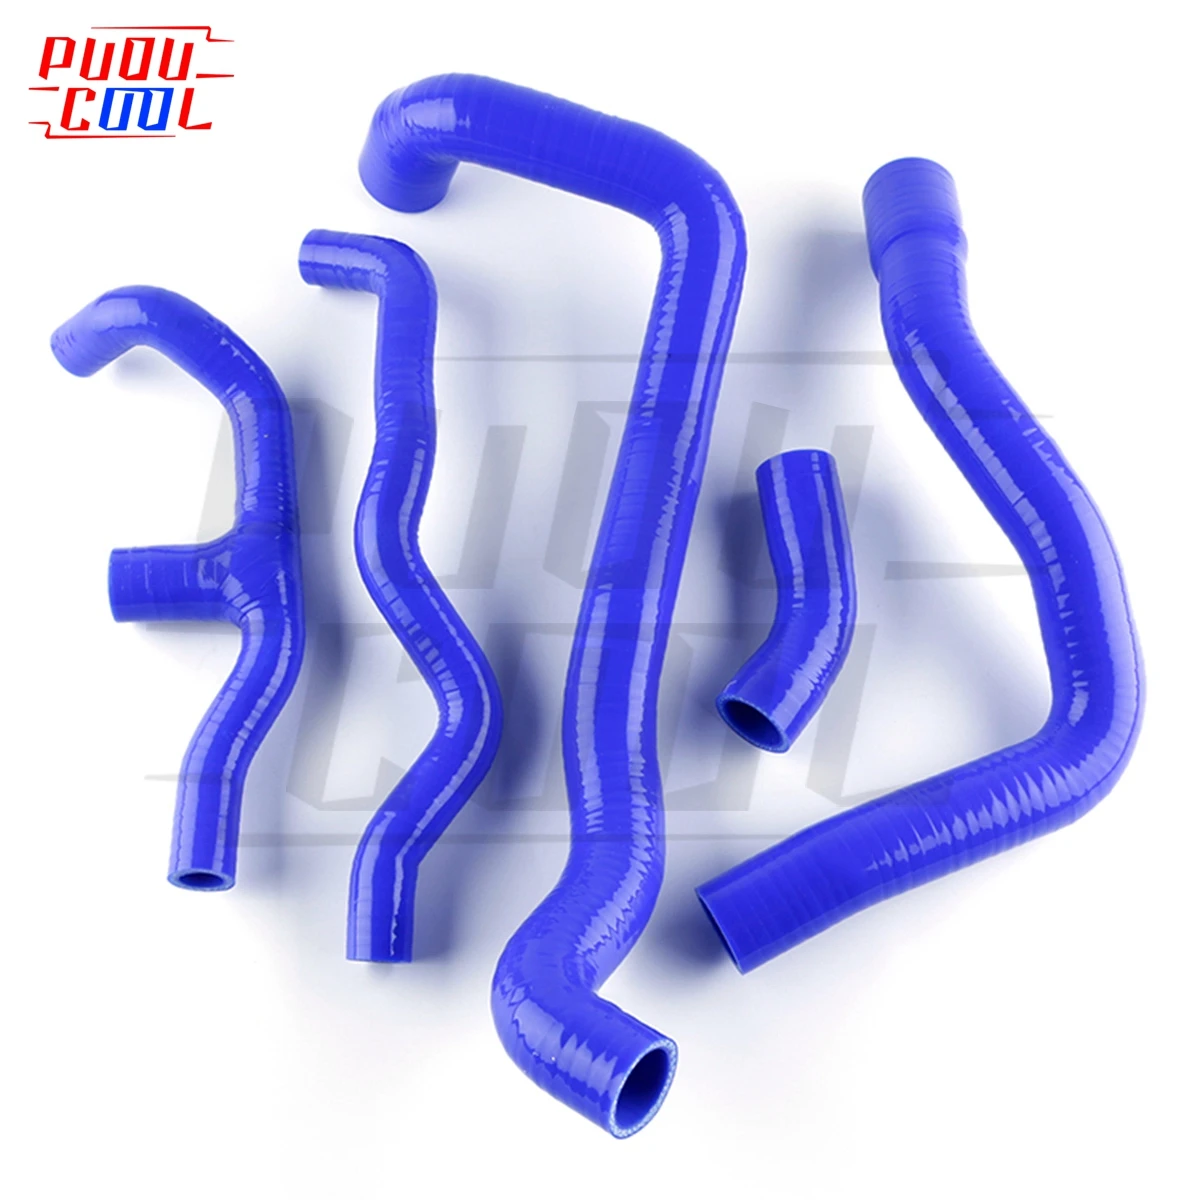 BLUE HOSE FOR 2000-2007 MERCEDES BENZ W203 C200K COUPE SPORT 2001 2002 2003 2004 2005 2006 SILICONE RADIATOR TUBE PIPE KIT 5PCS